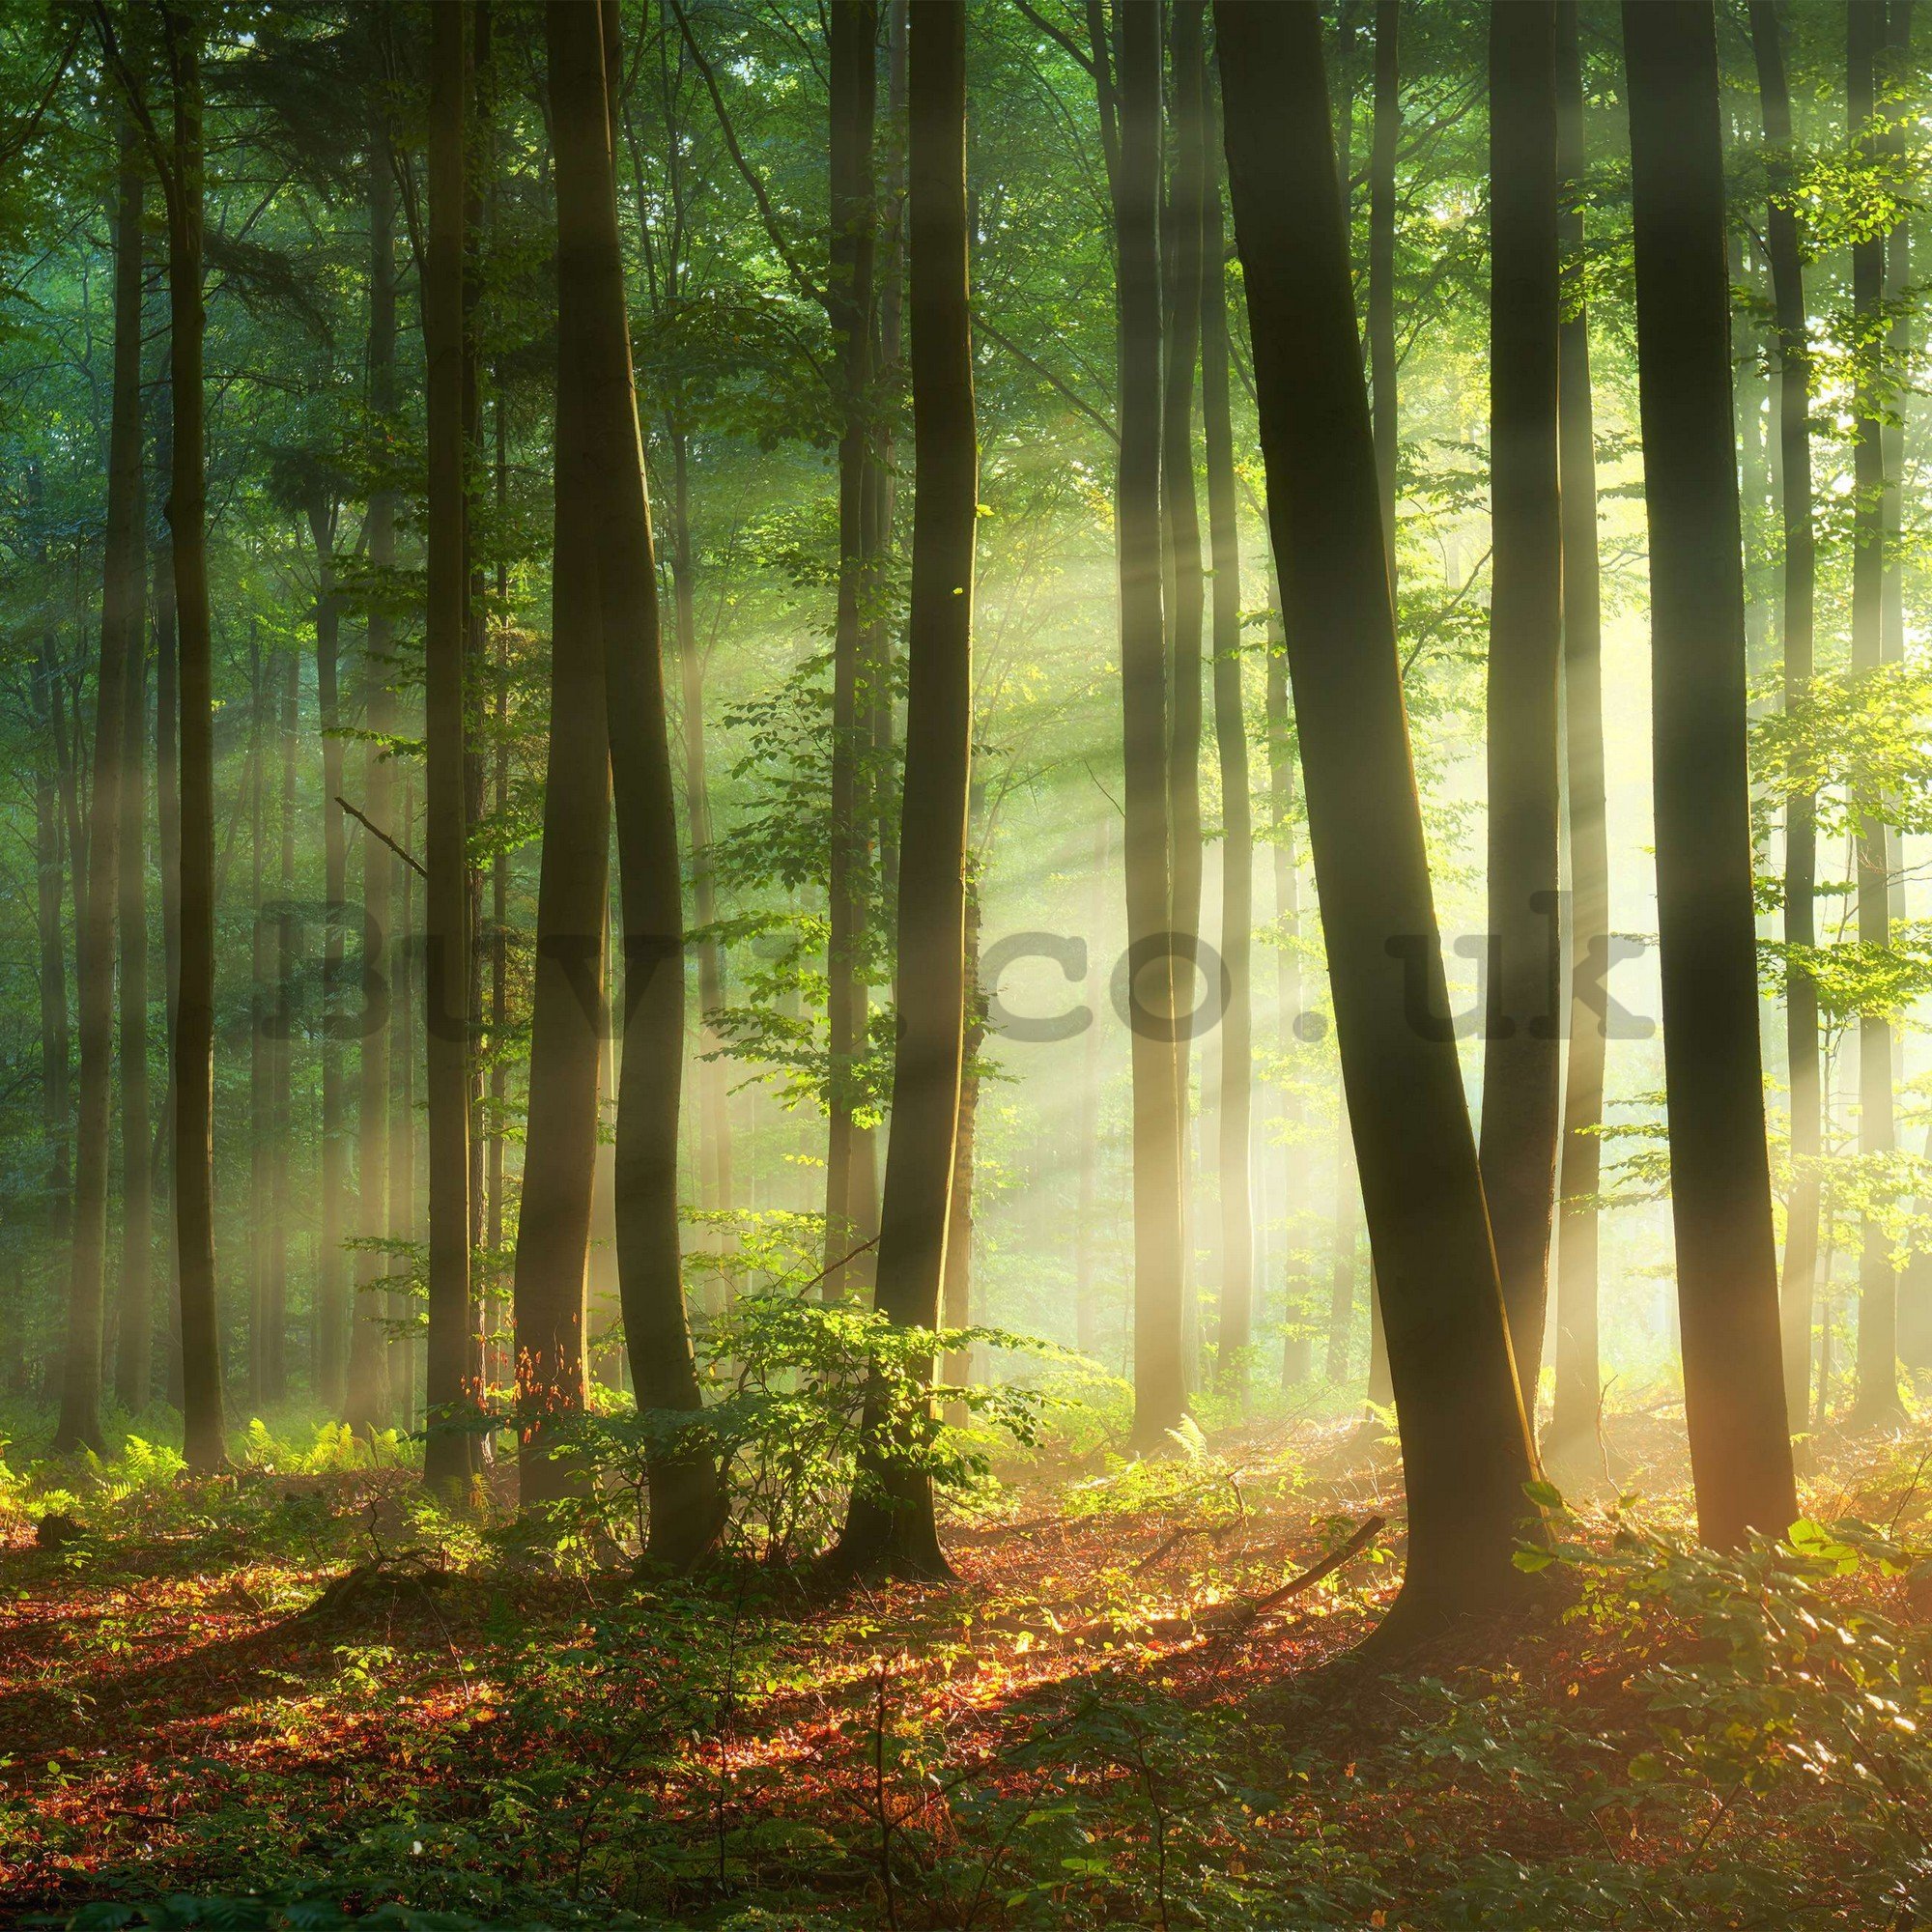 Wall mural vlies: Sunrise in the forest - 416x254 cm